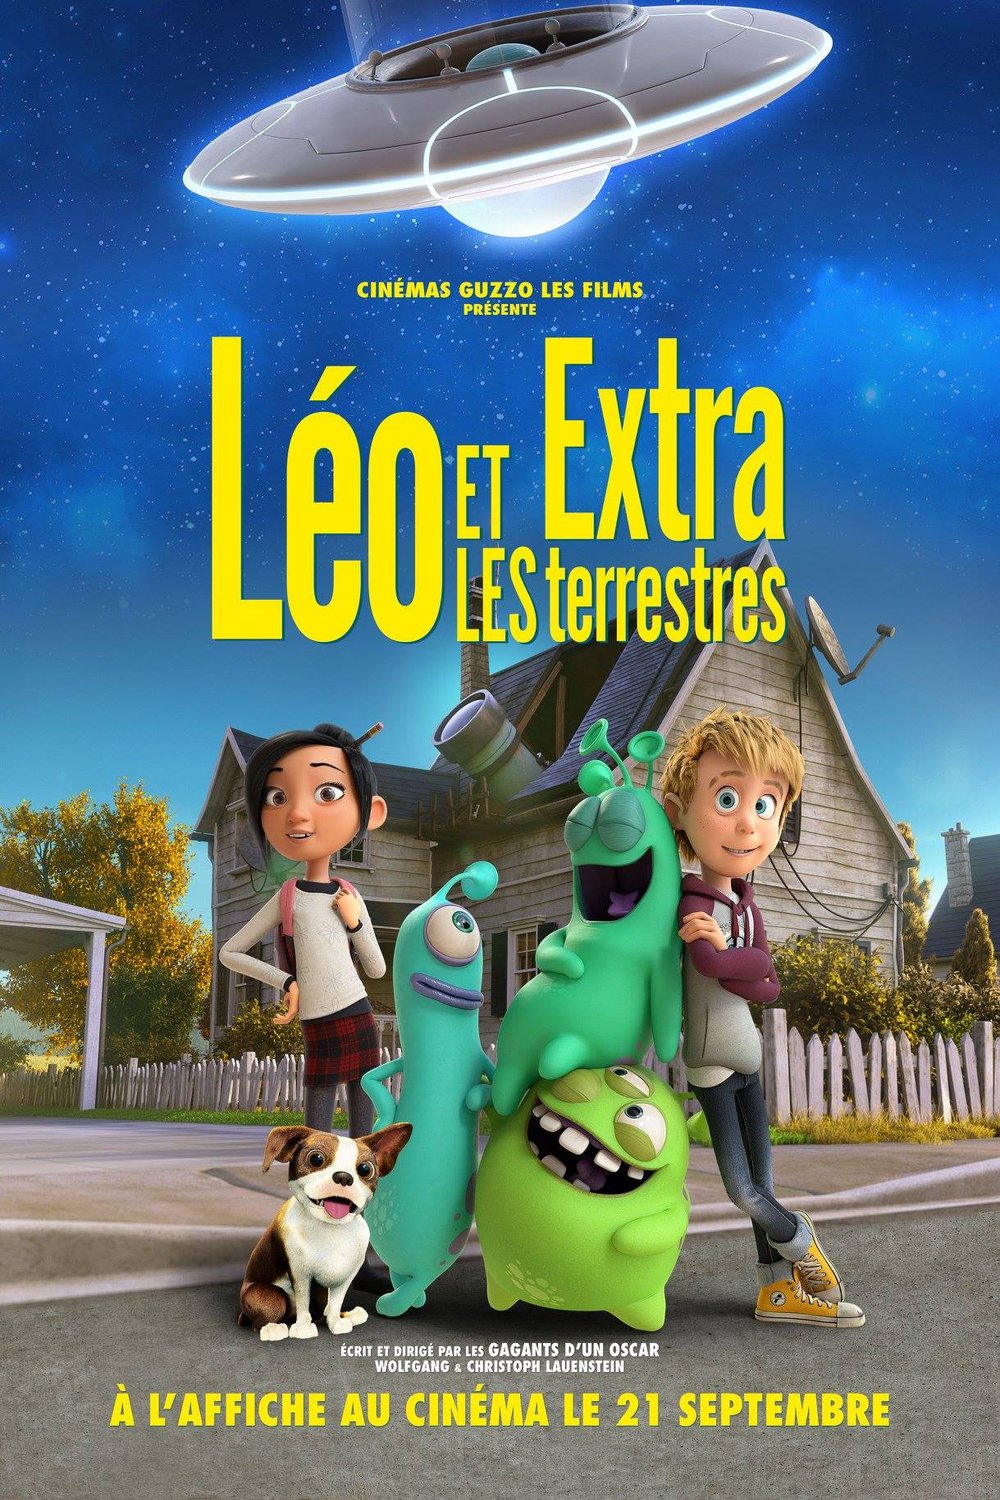 Poster of the movie Léo et les extra-terrestres